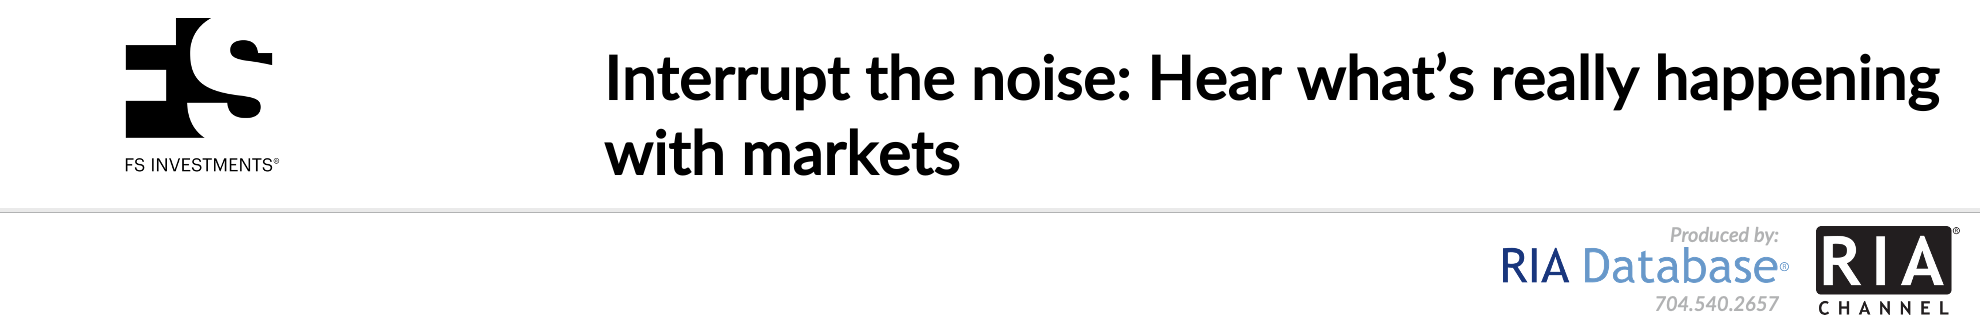 Interrupt the noise: Hear what’s really happening with markets